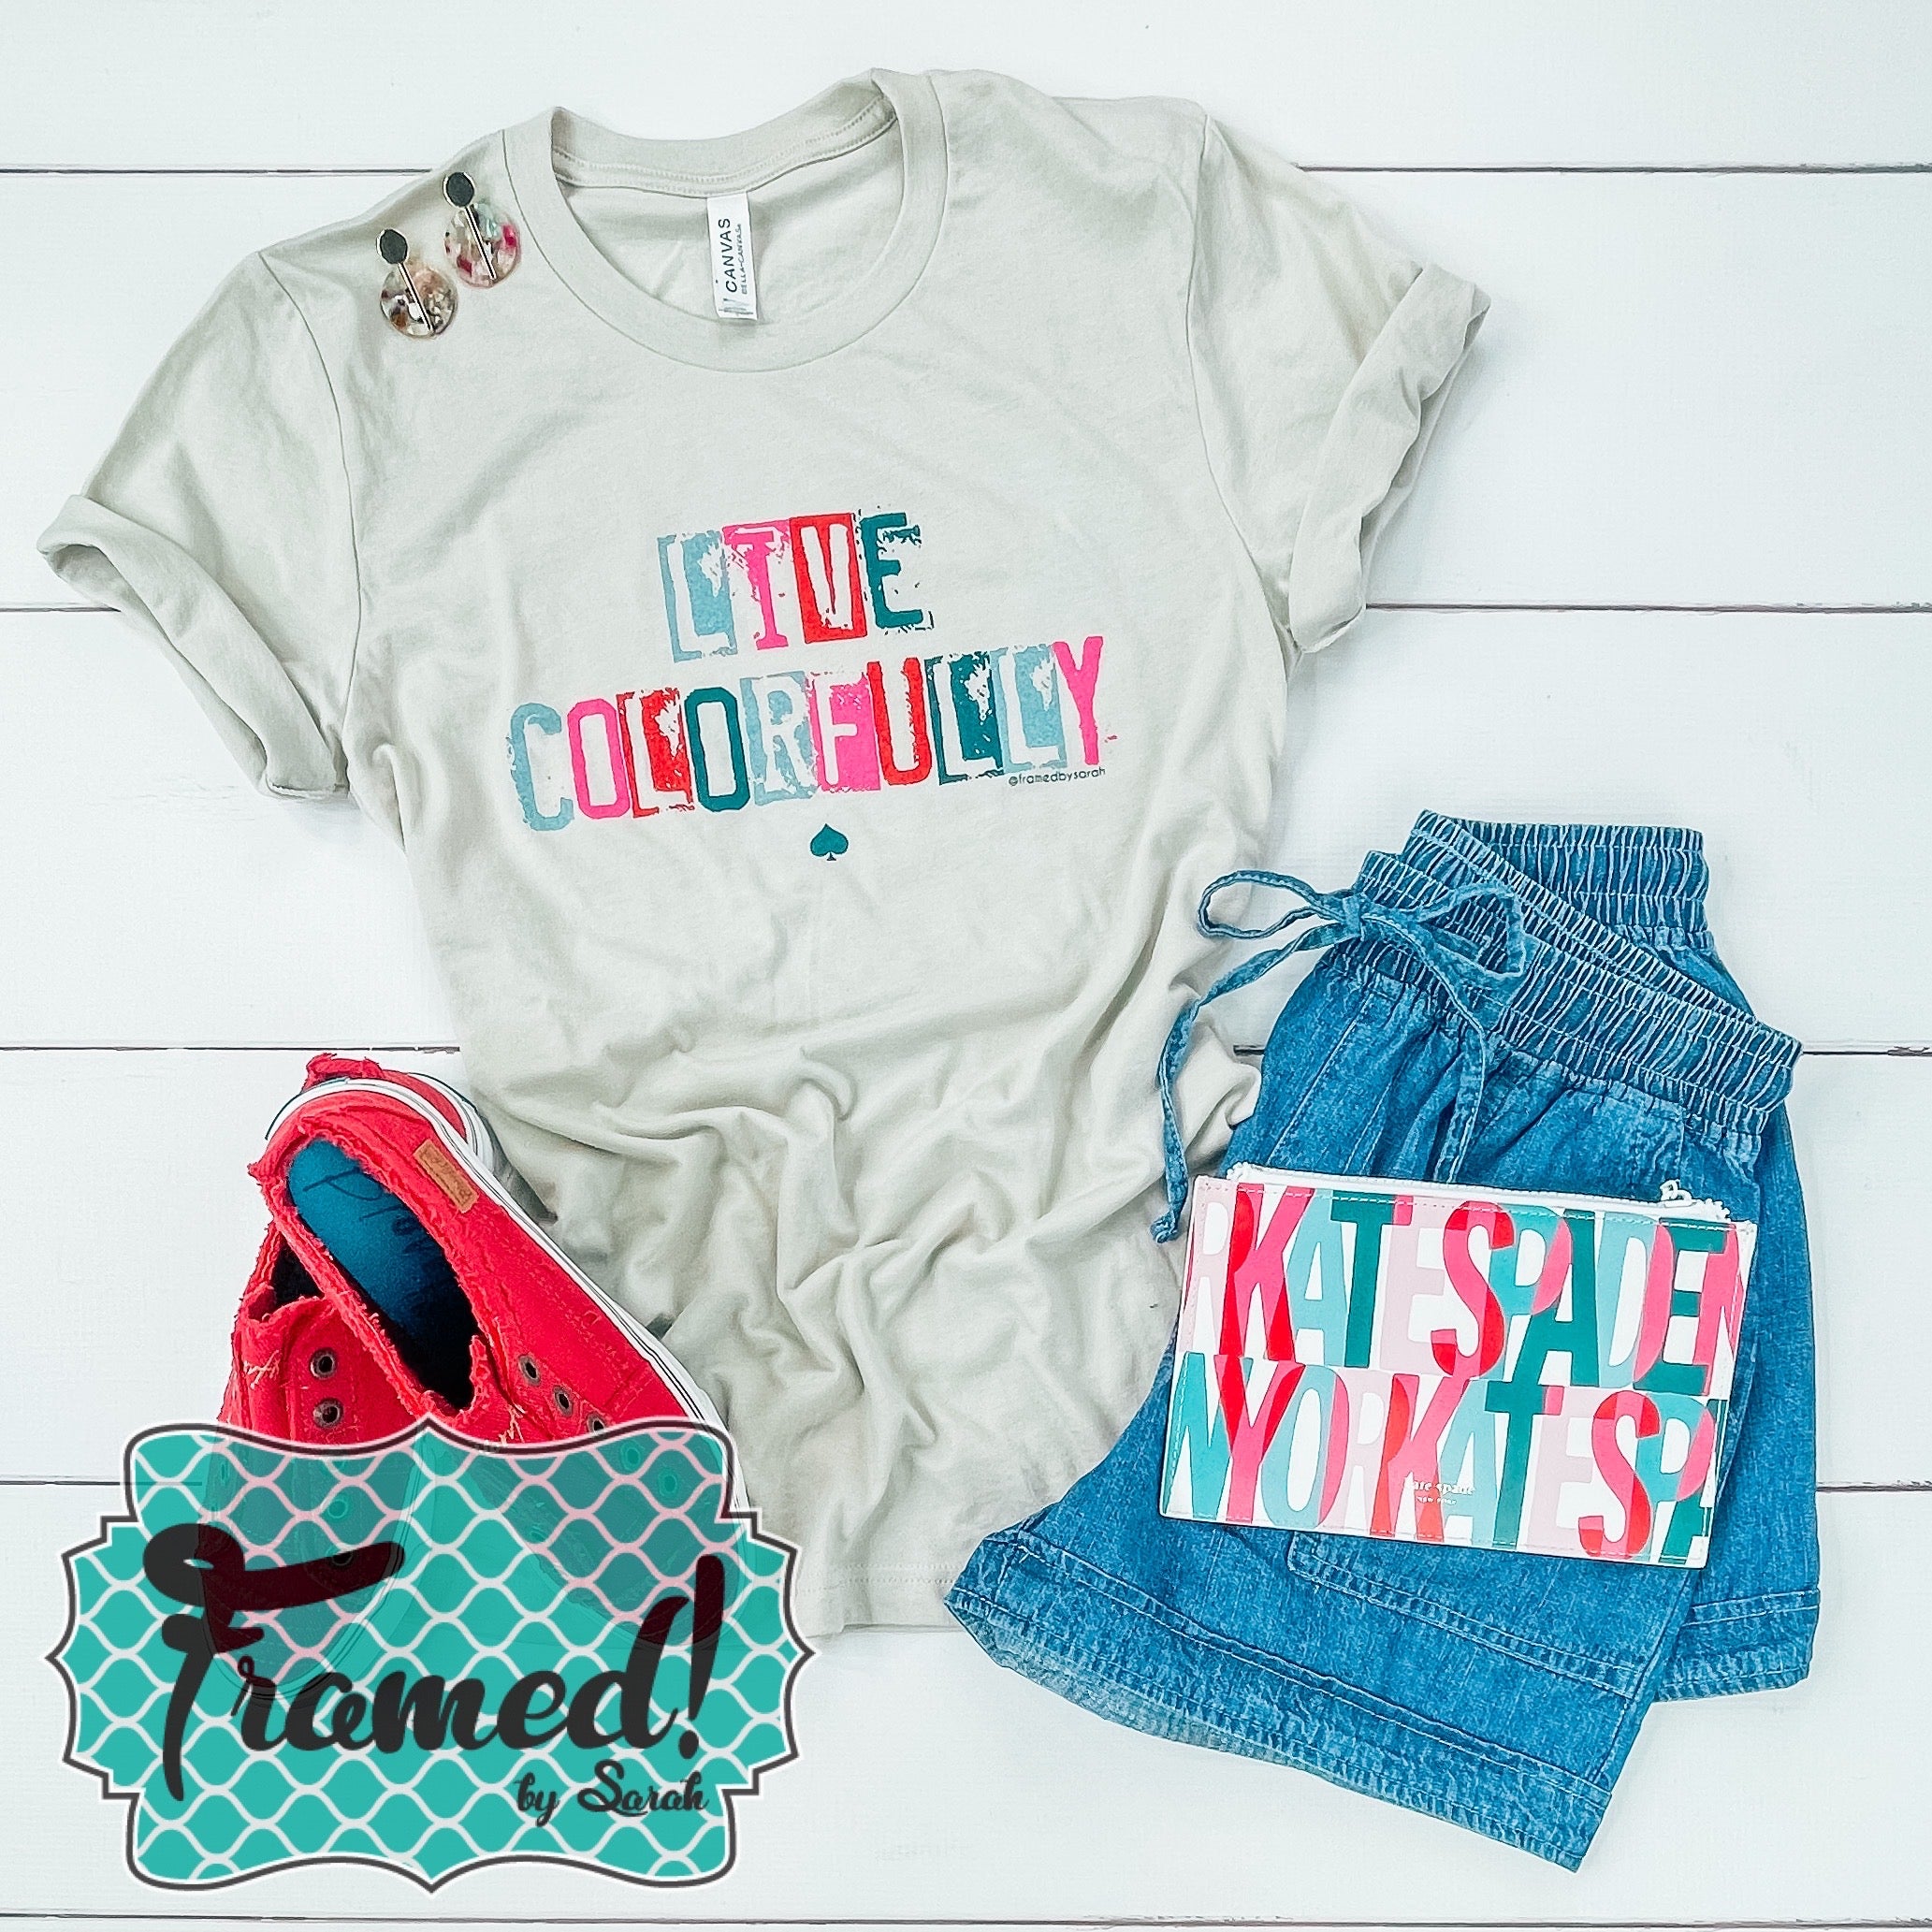 Live Colorfully Graphic Tee (Small, Lg & 2X only)